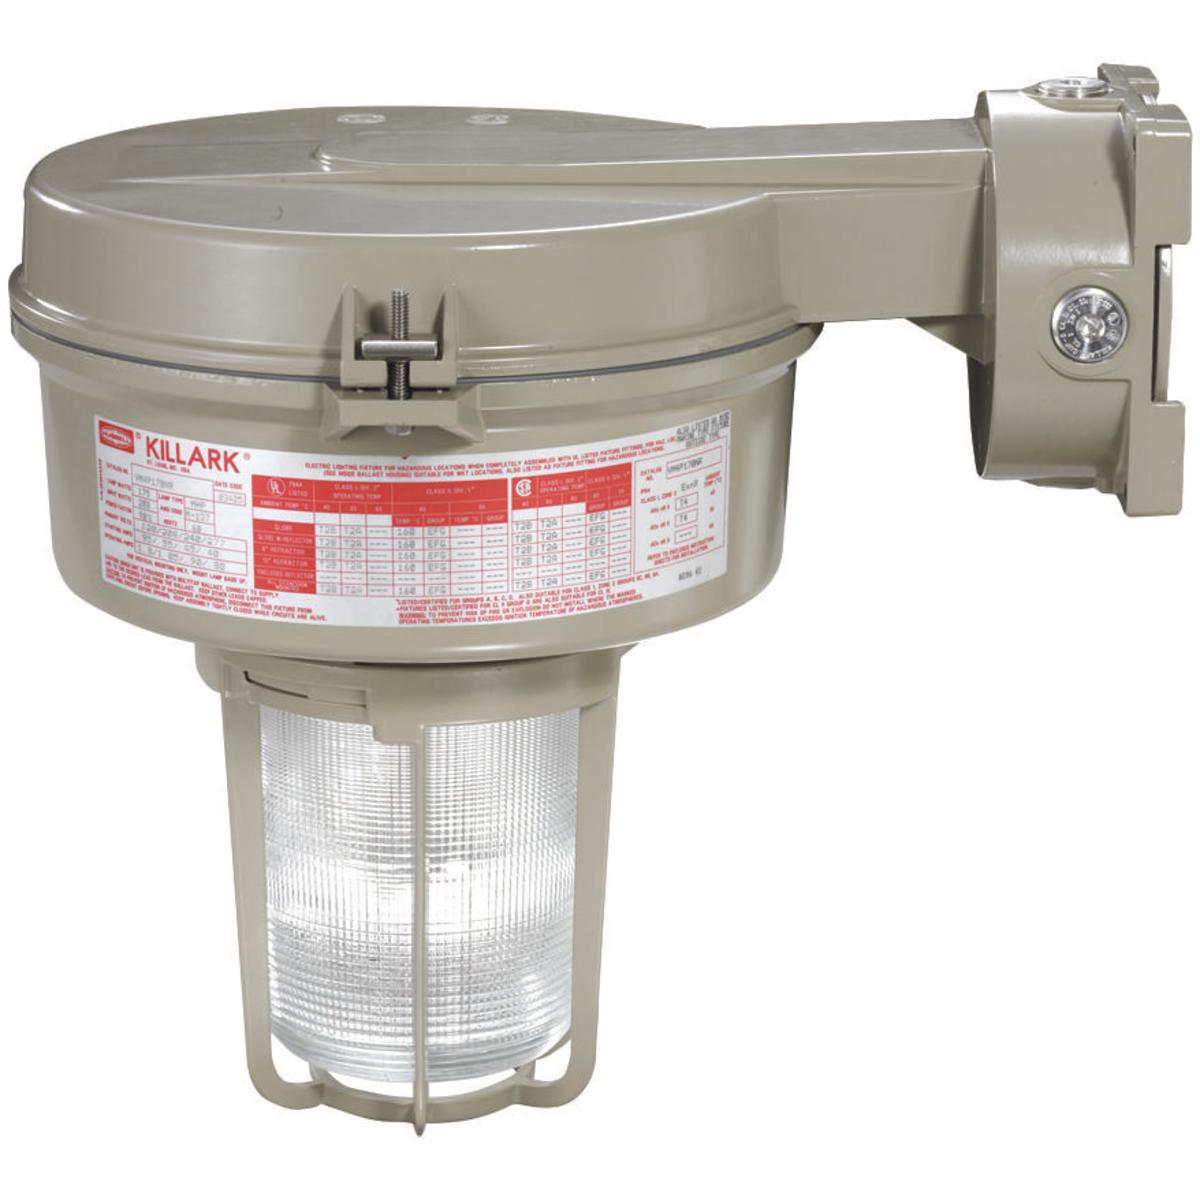 Hubbell VM3S050B2GLG VM3 Series - 50W High Pressure Sodium Quadri-Volt - 3/4" Wall Mount - Globe and Guard  ; Ballast tank and splice box – corrosion resistant copper-free aluminum alloy with baked powder epoxy/polyester finish, electrostatically applied for complete, uniform